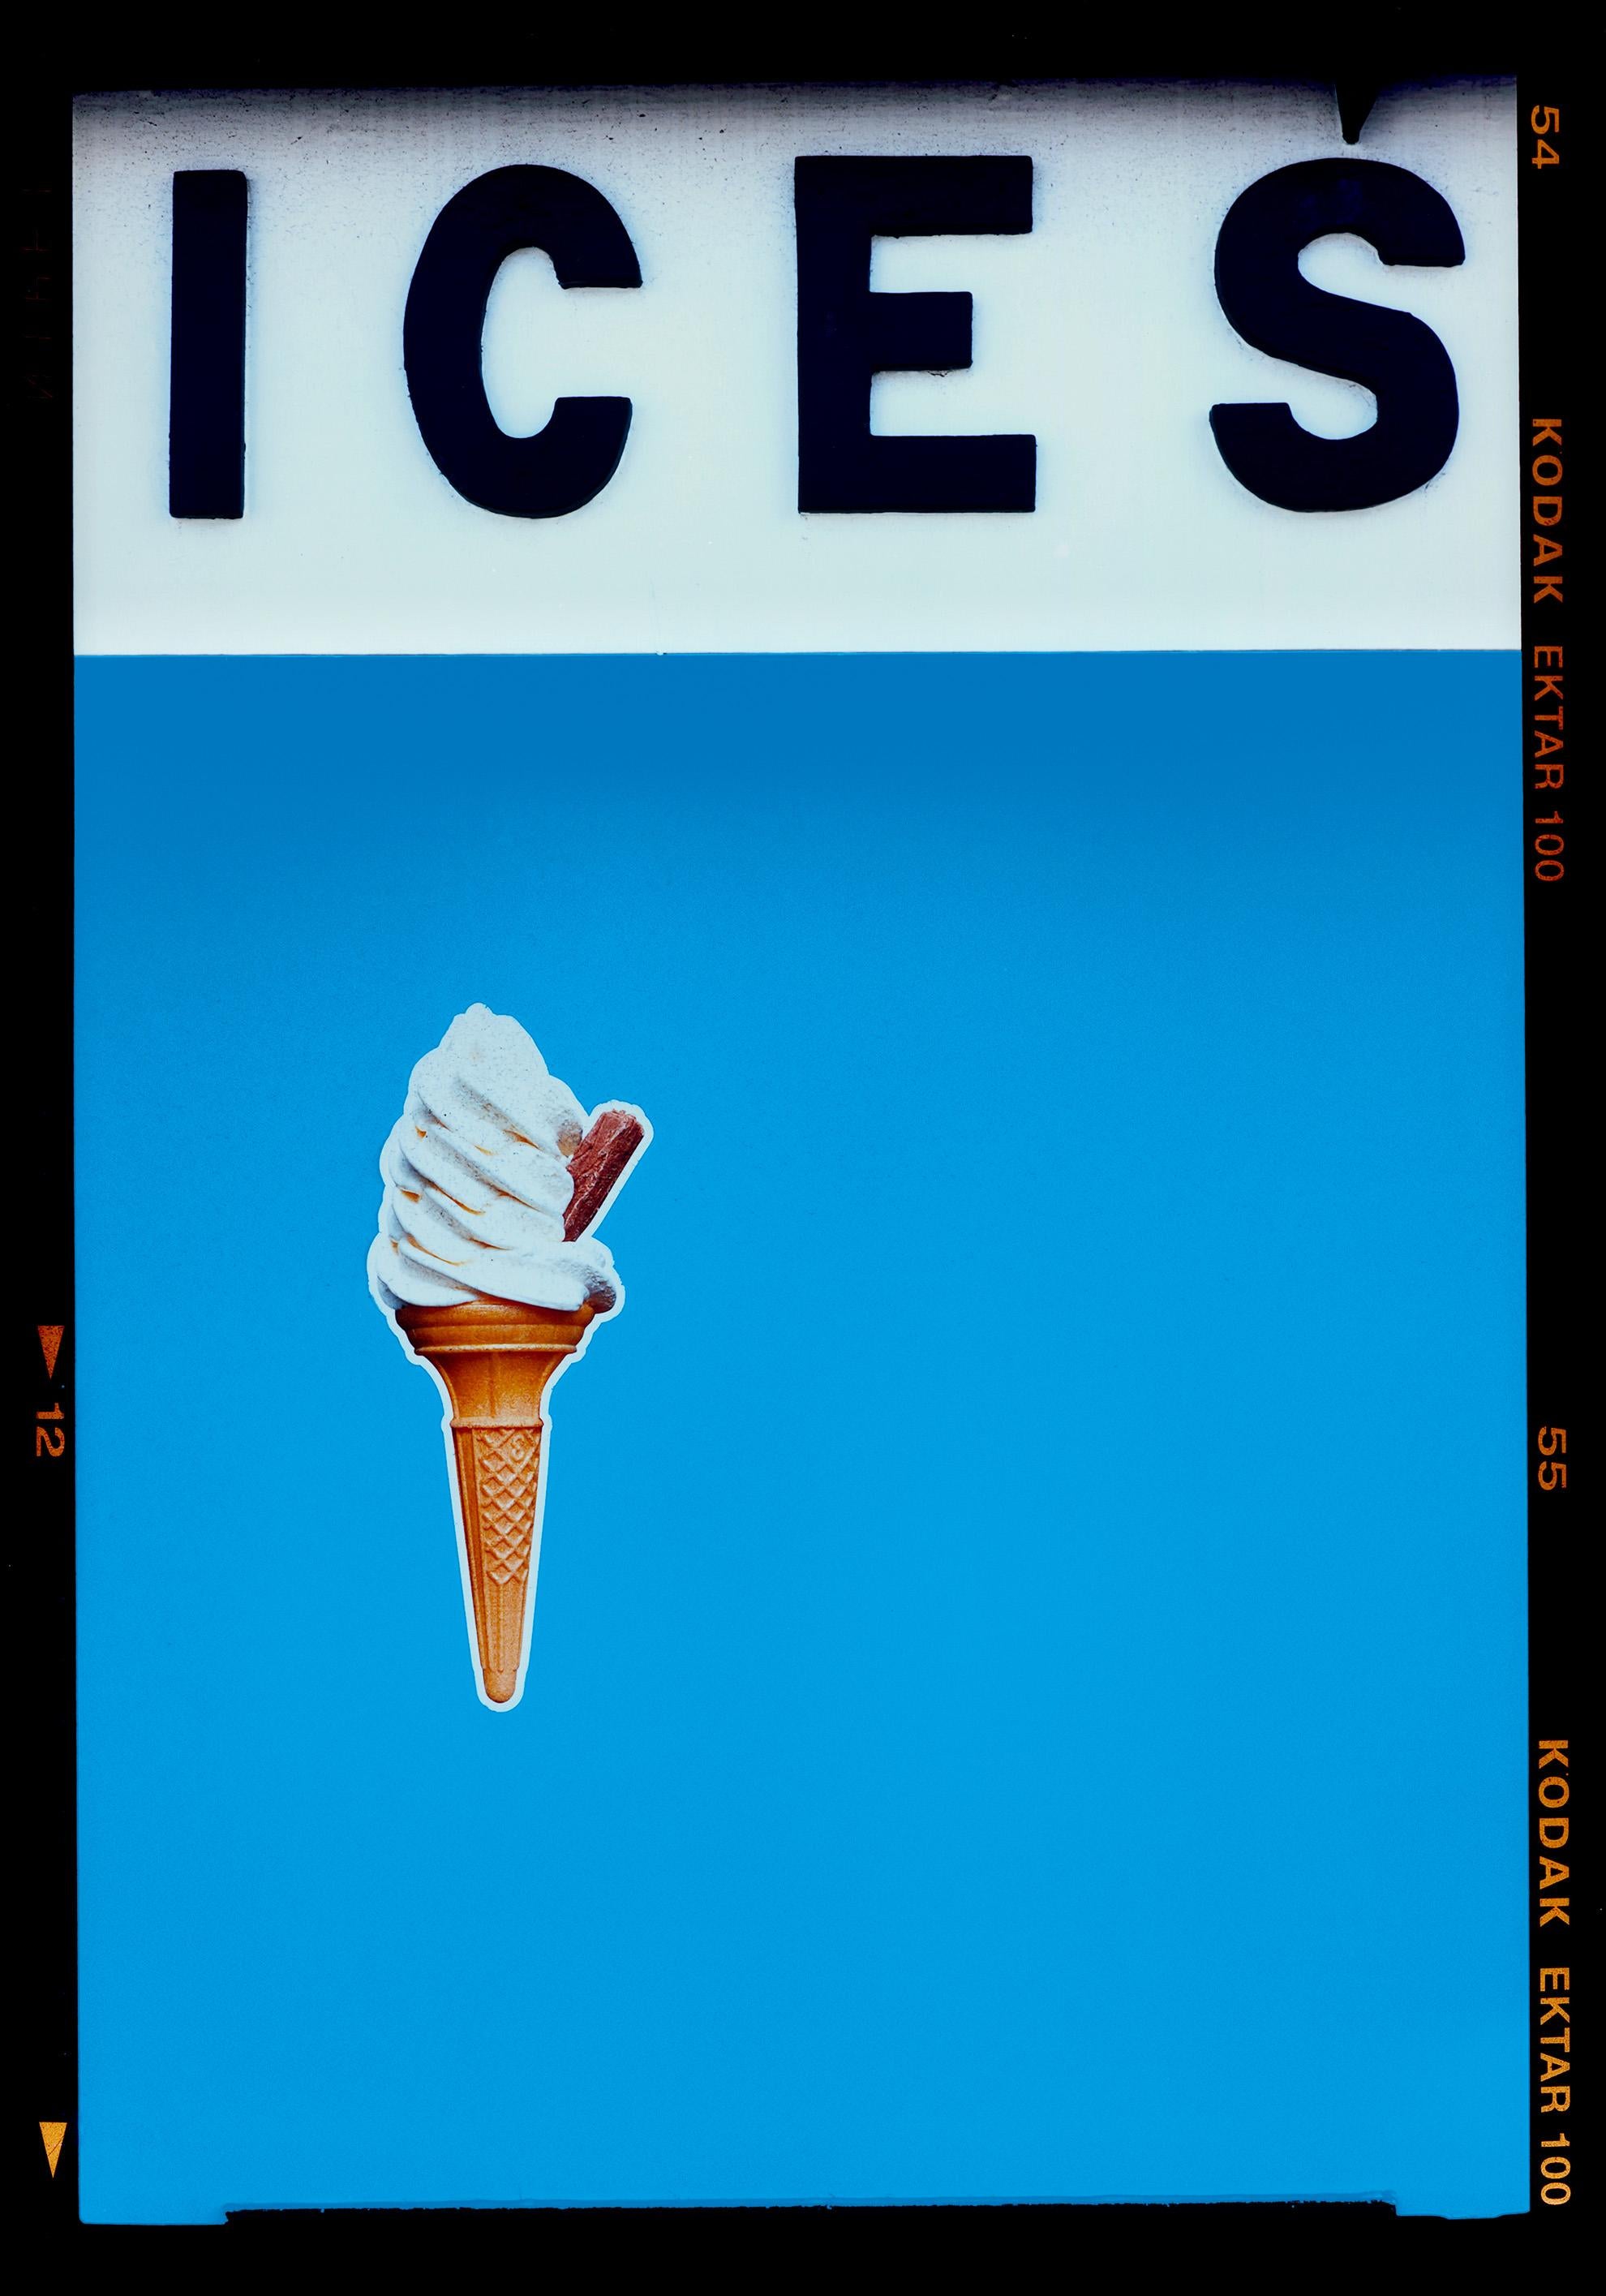 Richard Heeps Color Photograph - ICES (Sky Blue), Bexhill-on-Sea - British seaside color photography